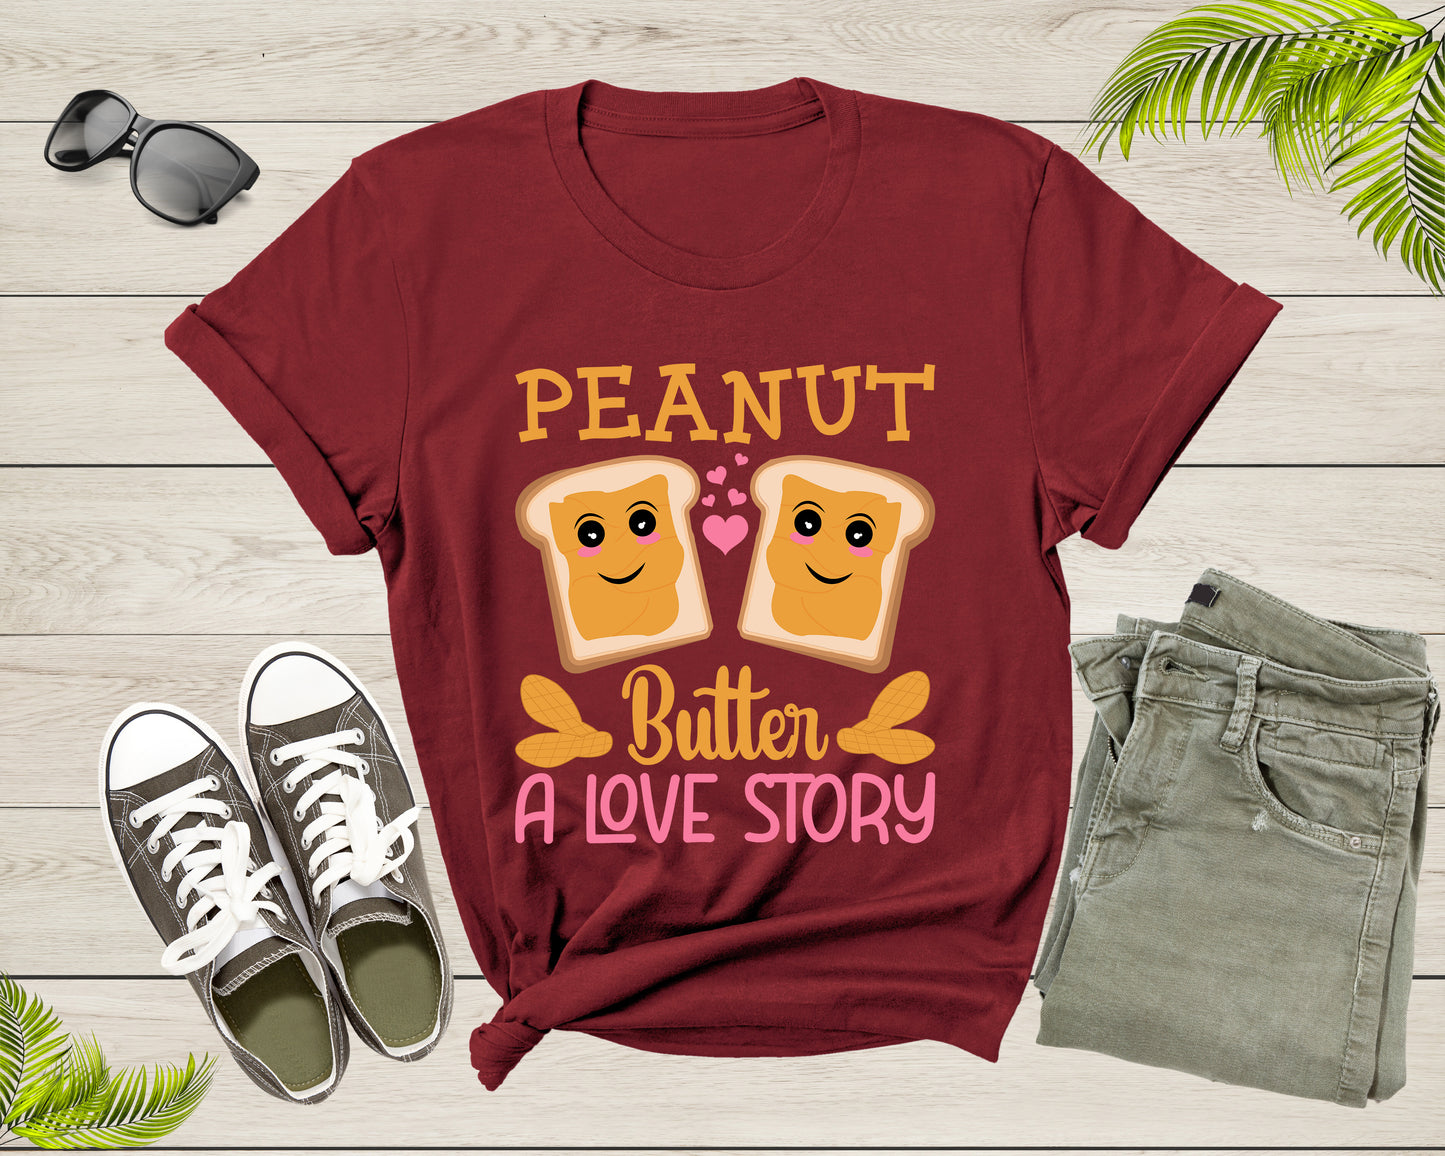 Peanut Butter and Jelly Love Story Funny Foodie Lover Gift T-Shirt Peanut Butter Jelly Shirt Peanut Butter Lover Tshirt Food Shirt